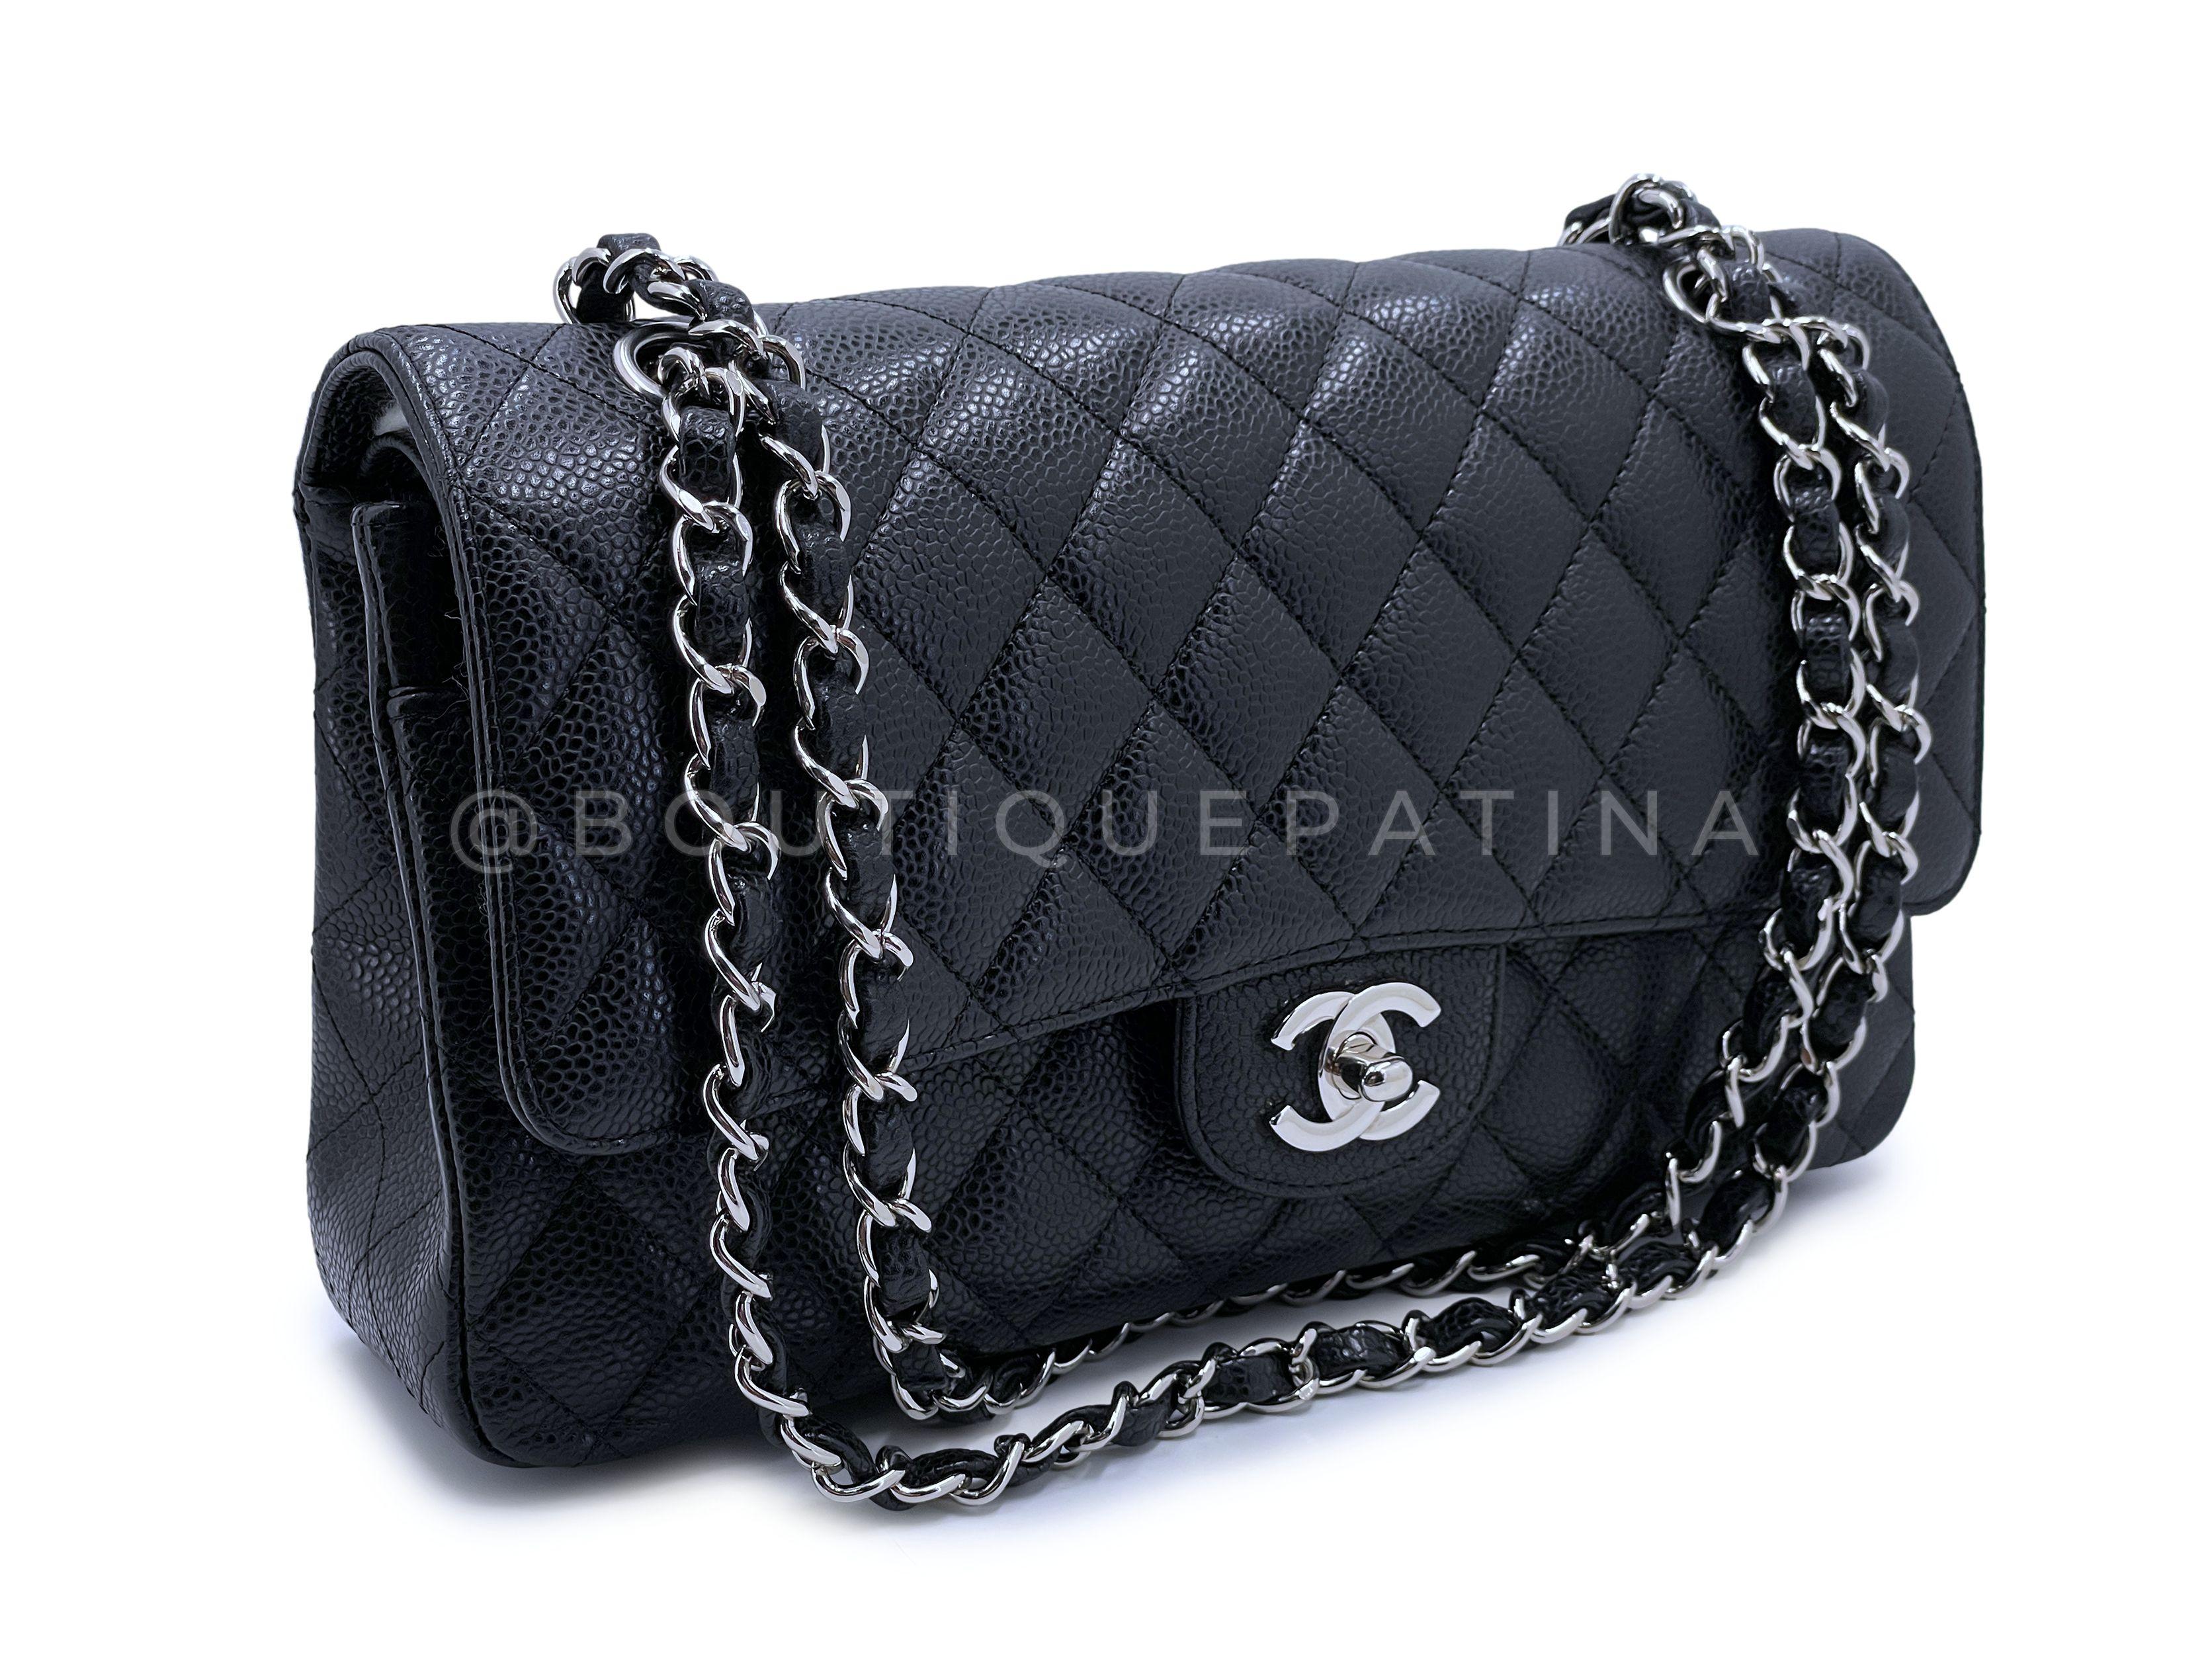 Store item: 65078
The iconic holy grail bag is the Chanel Classic Flap. Coveted for its simplicity and elegance - woven chain double strap that can be worn short or long, turnlock CC clasp, lambskin interior.

Now called the 11.12 bag in their most